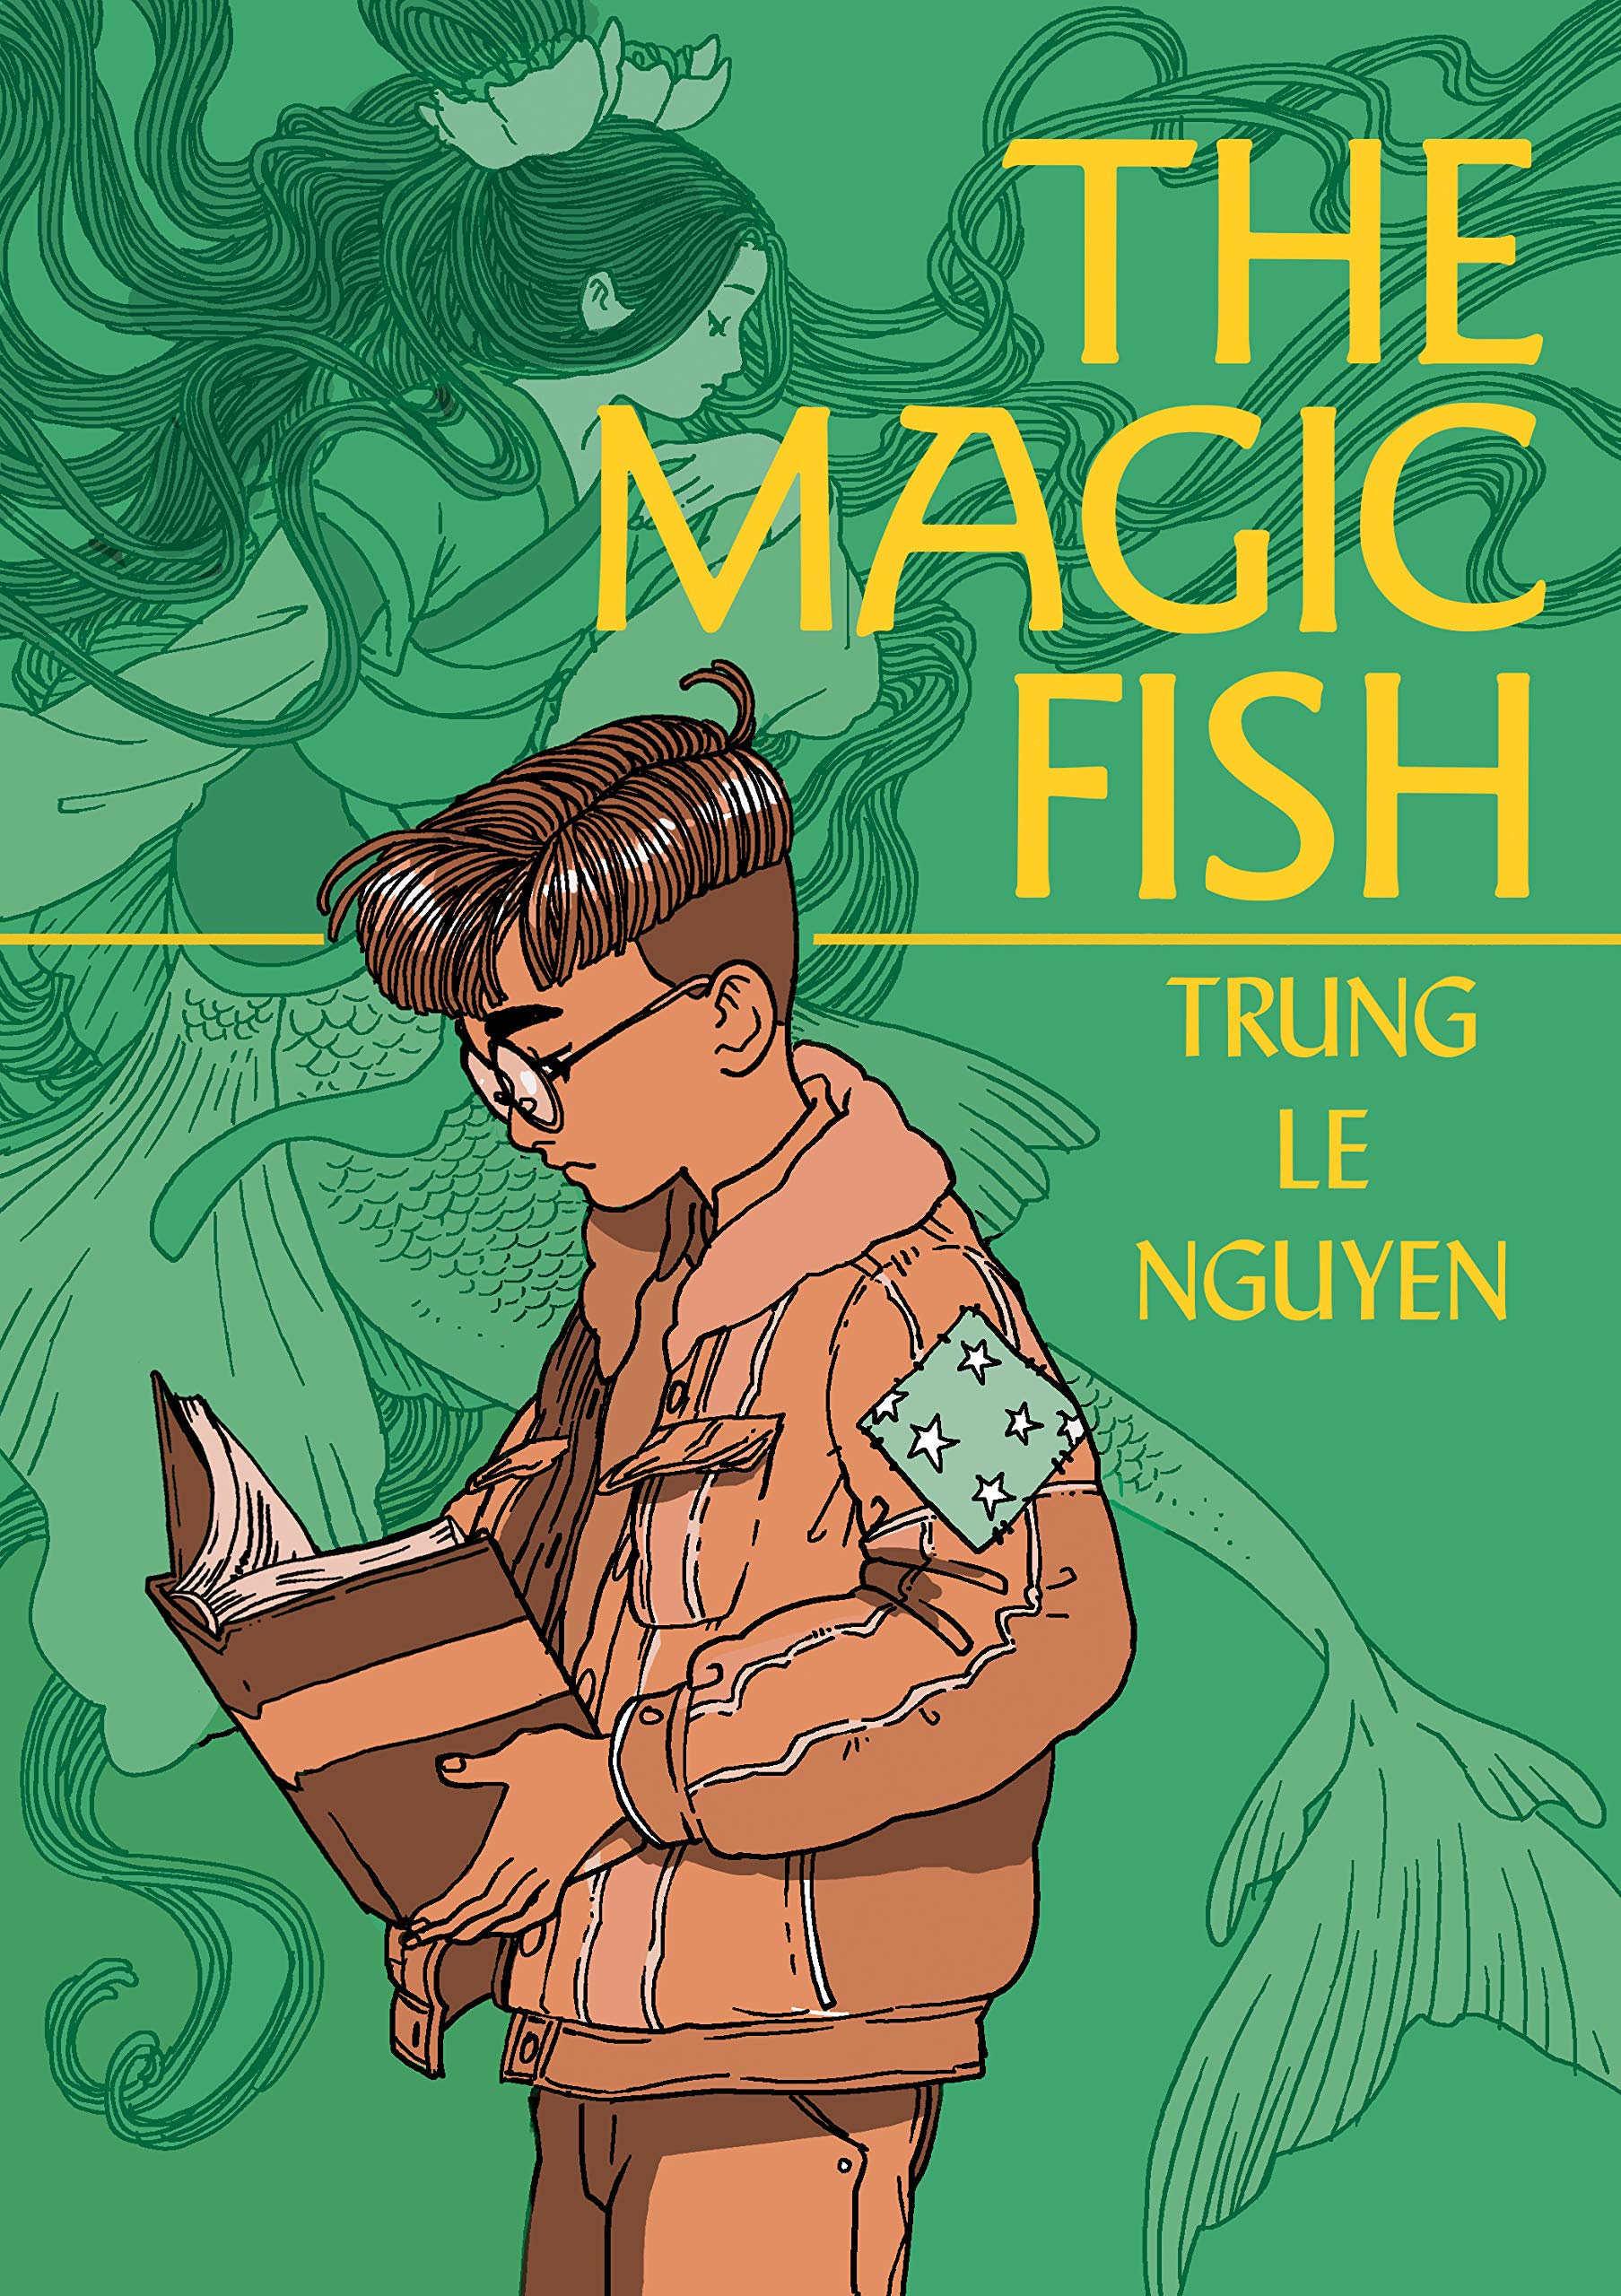 An illustration of a young boy reading a book. In the background is an illustration of a mermaid. The text reads "The Magic Fish"